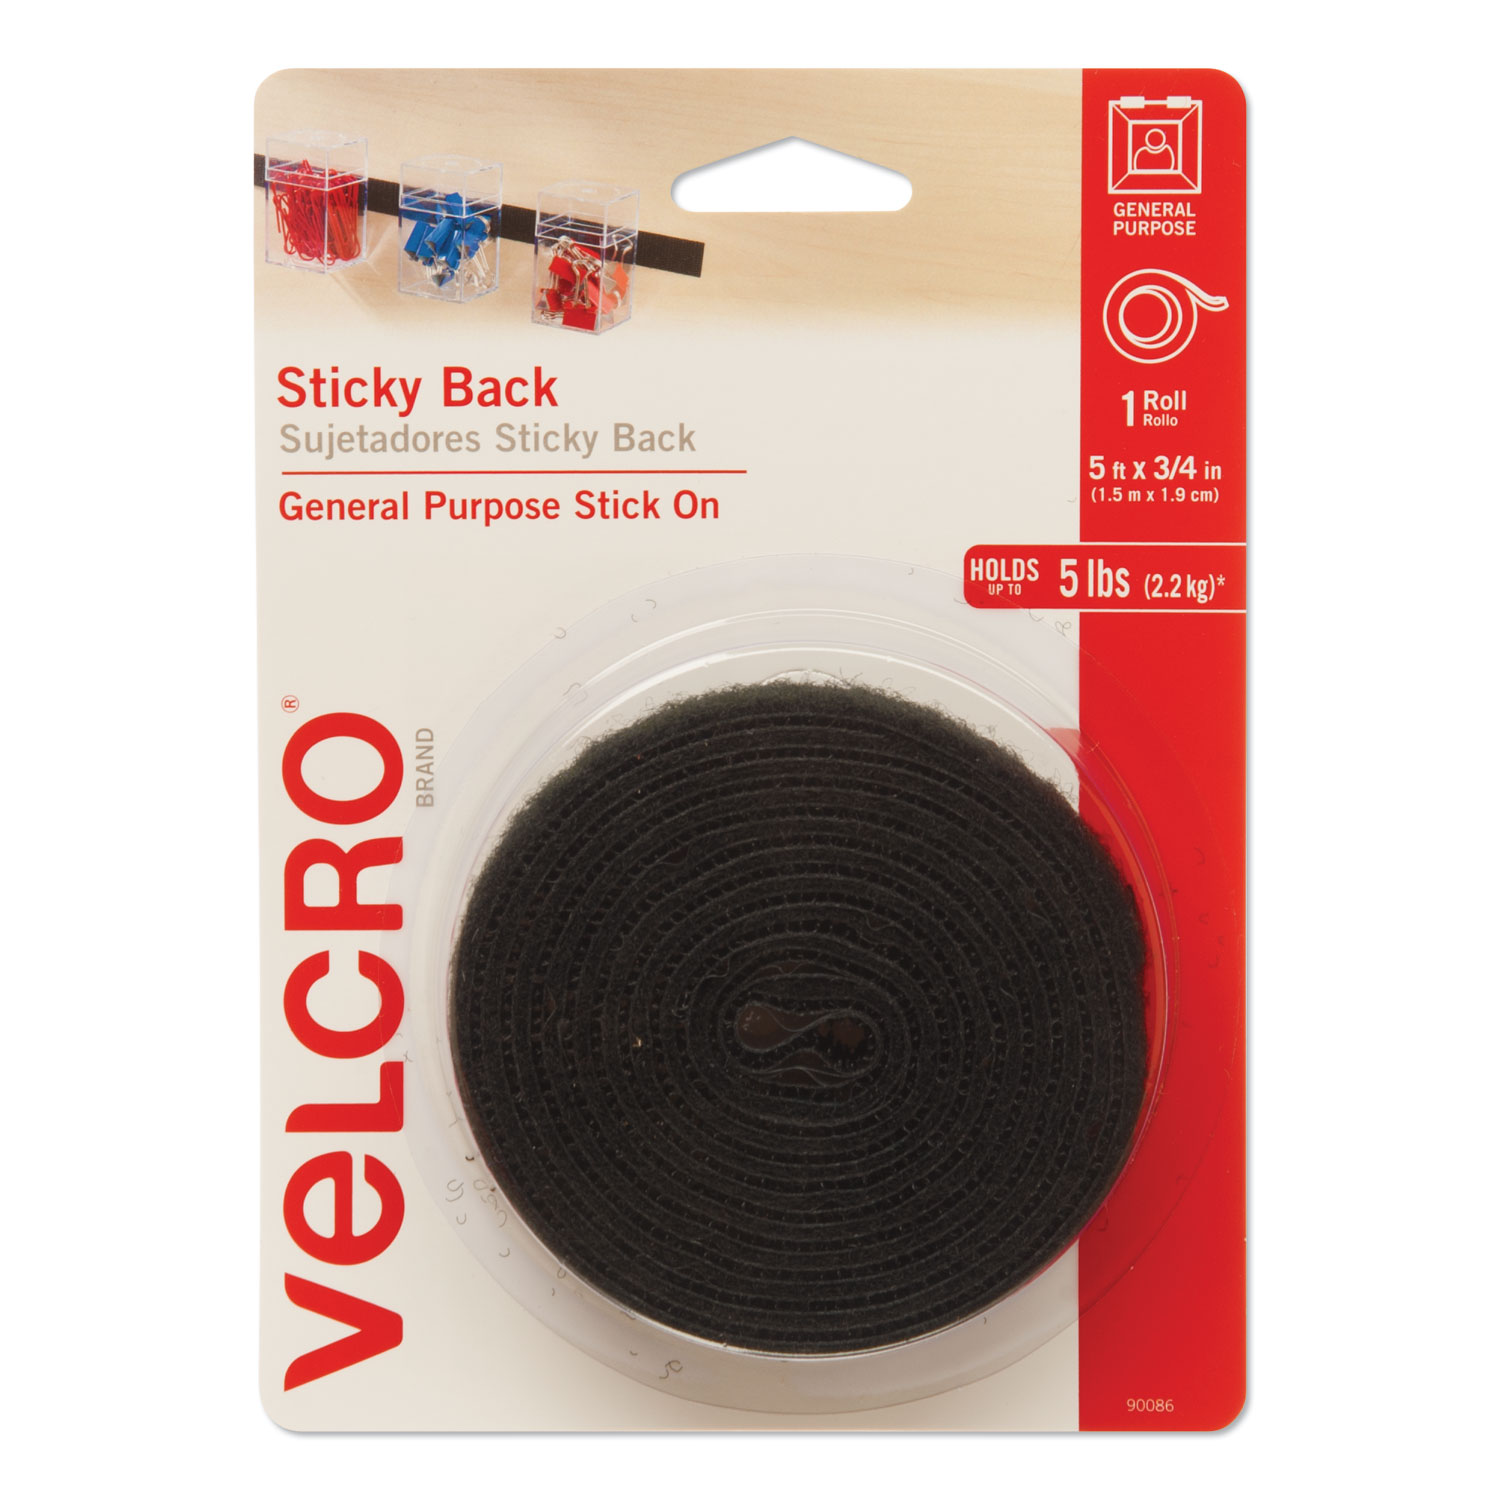  VELCRO Brand 90086 Sticky-Back Fasteners with Dispenser, Removable Adhesive, 0.75 x 5 ft, Black (VEK90086) 